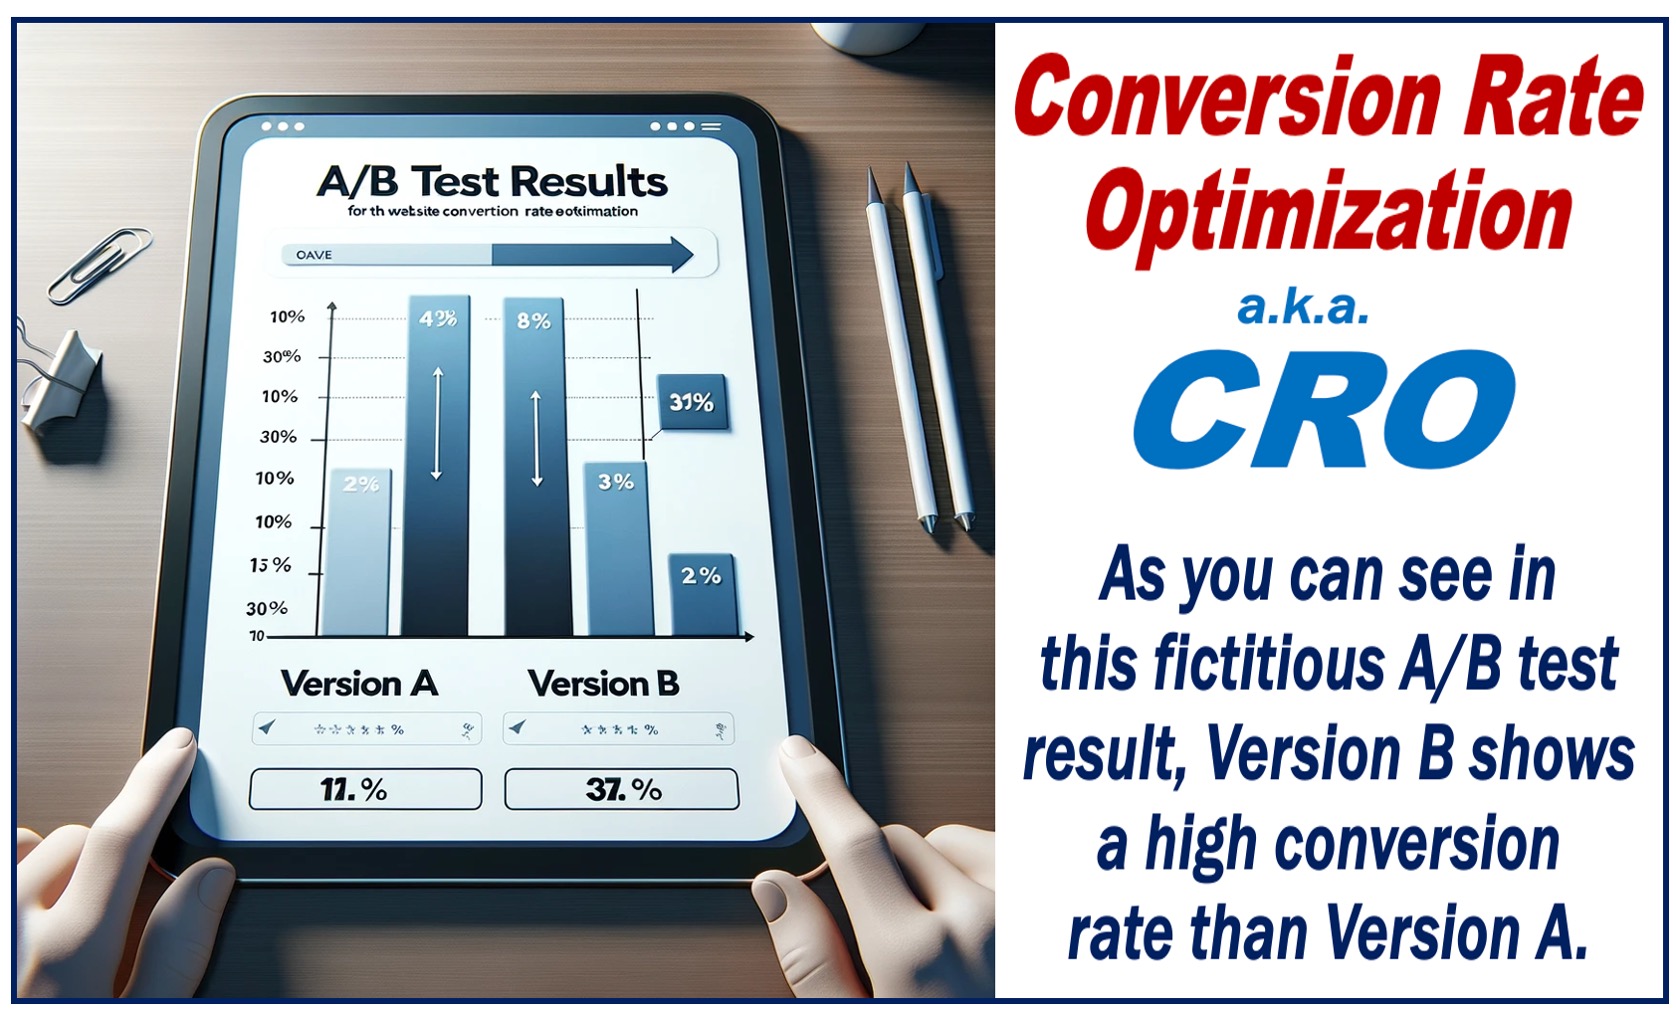 Image of an A/B Test for Conversion Rate Optimization